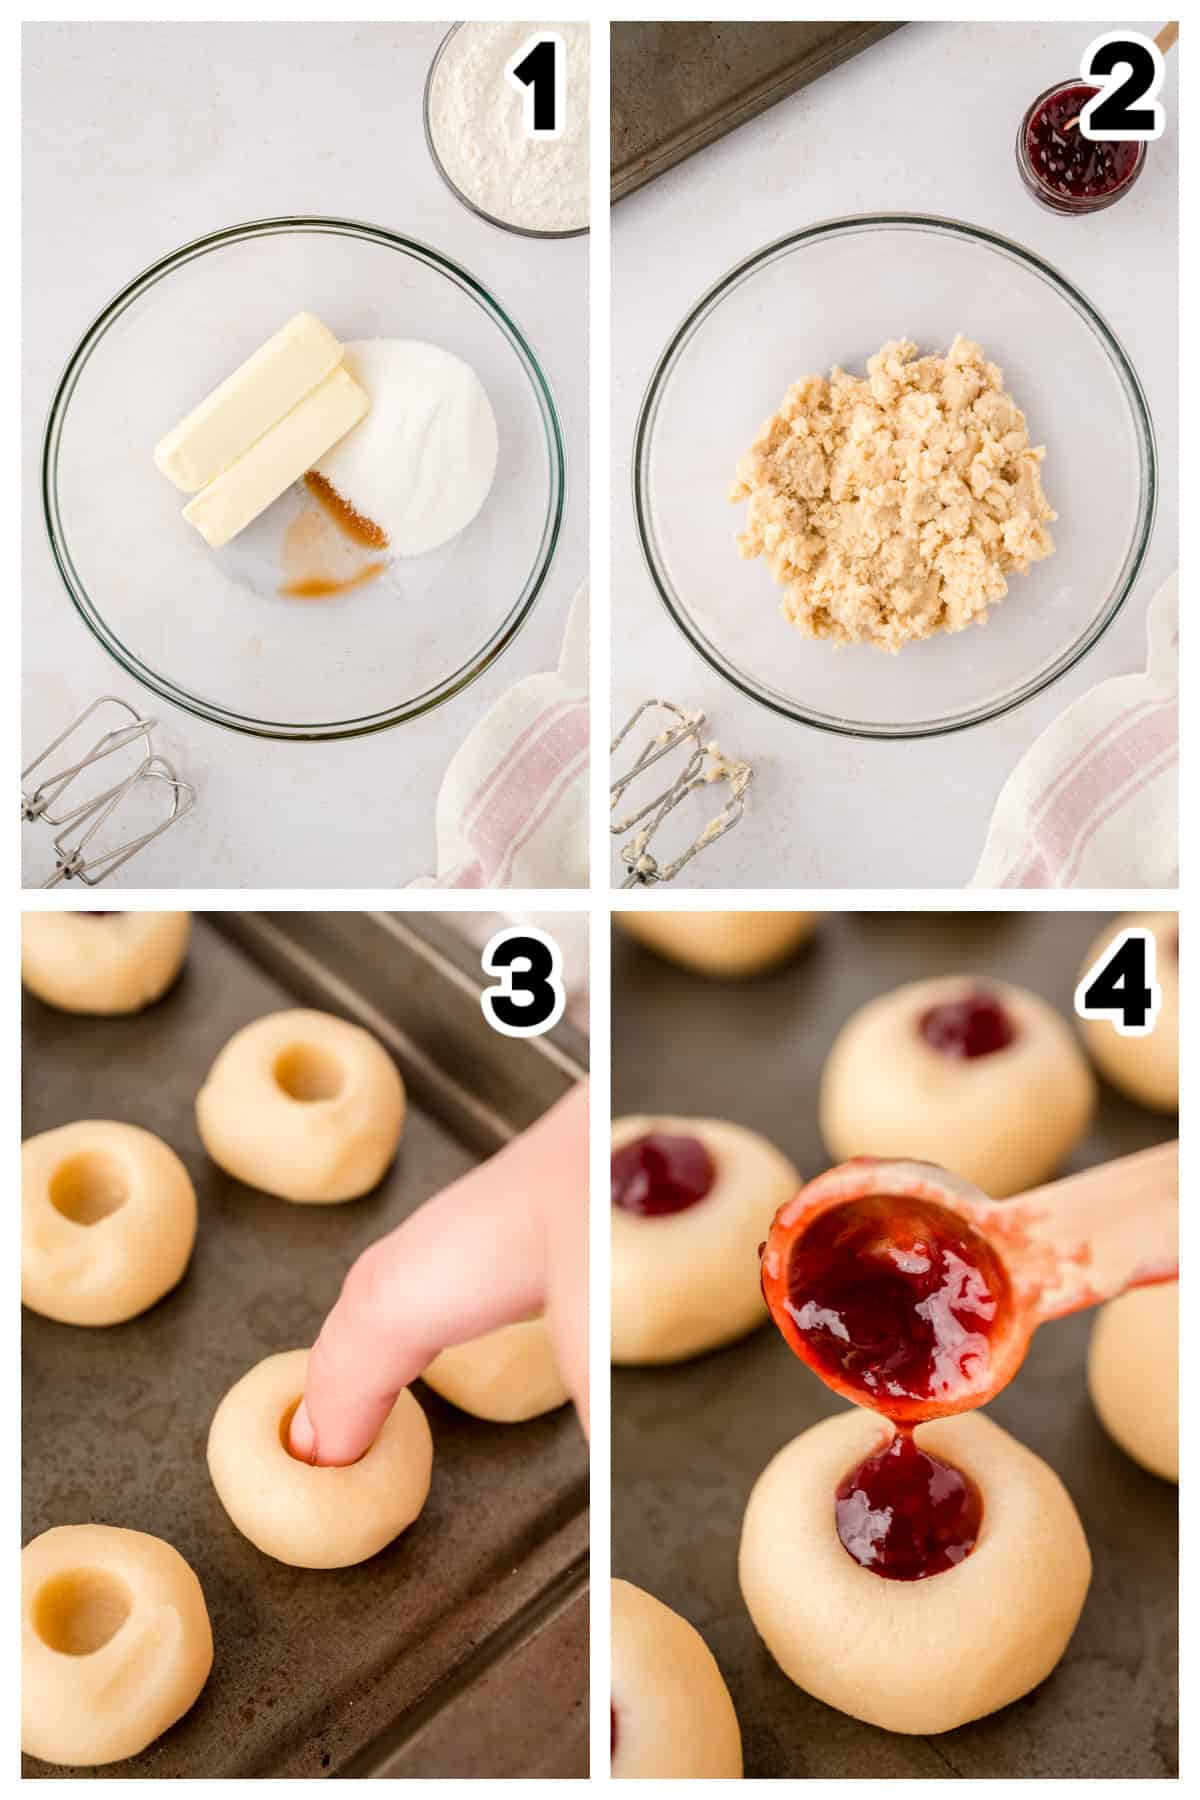 Collage showing how to make thumbprint cookies with raspberry jam.